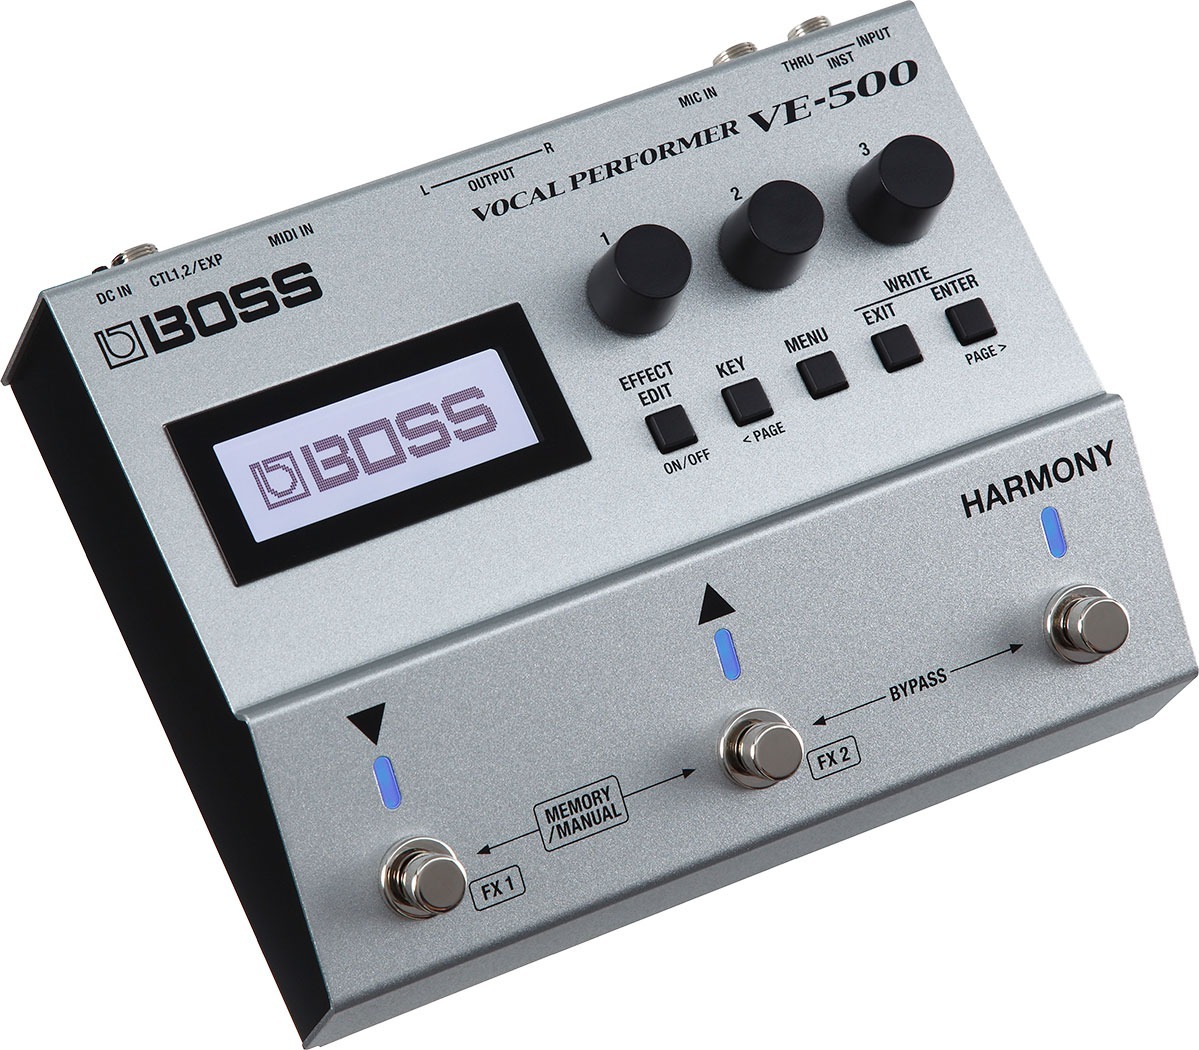 Pedal Boss Vocal Performer Ve-500 Ve500 C/ Nota Fiscal - R$ 33.499,00